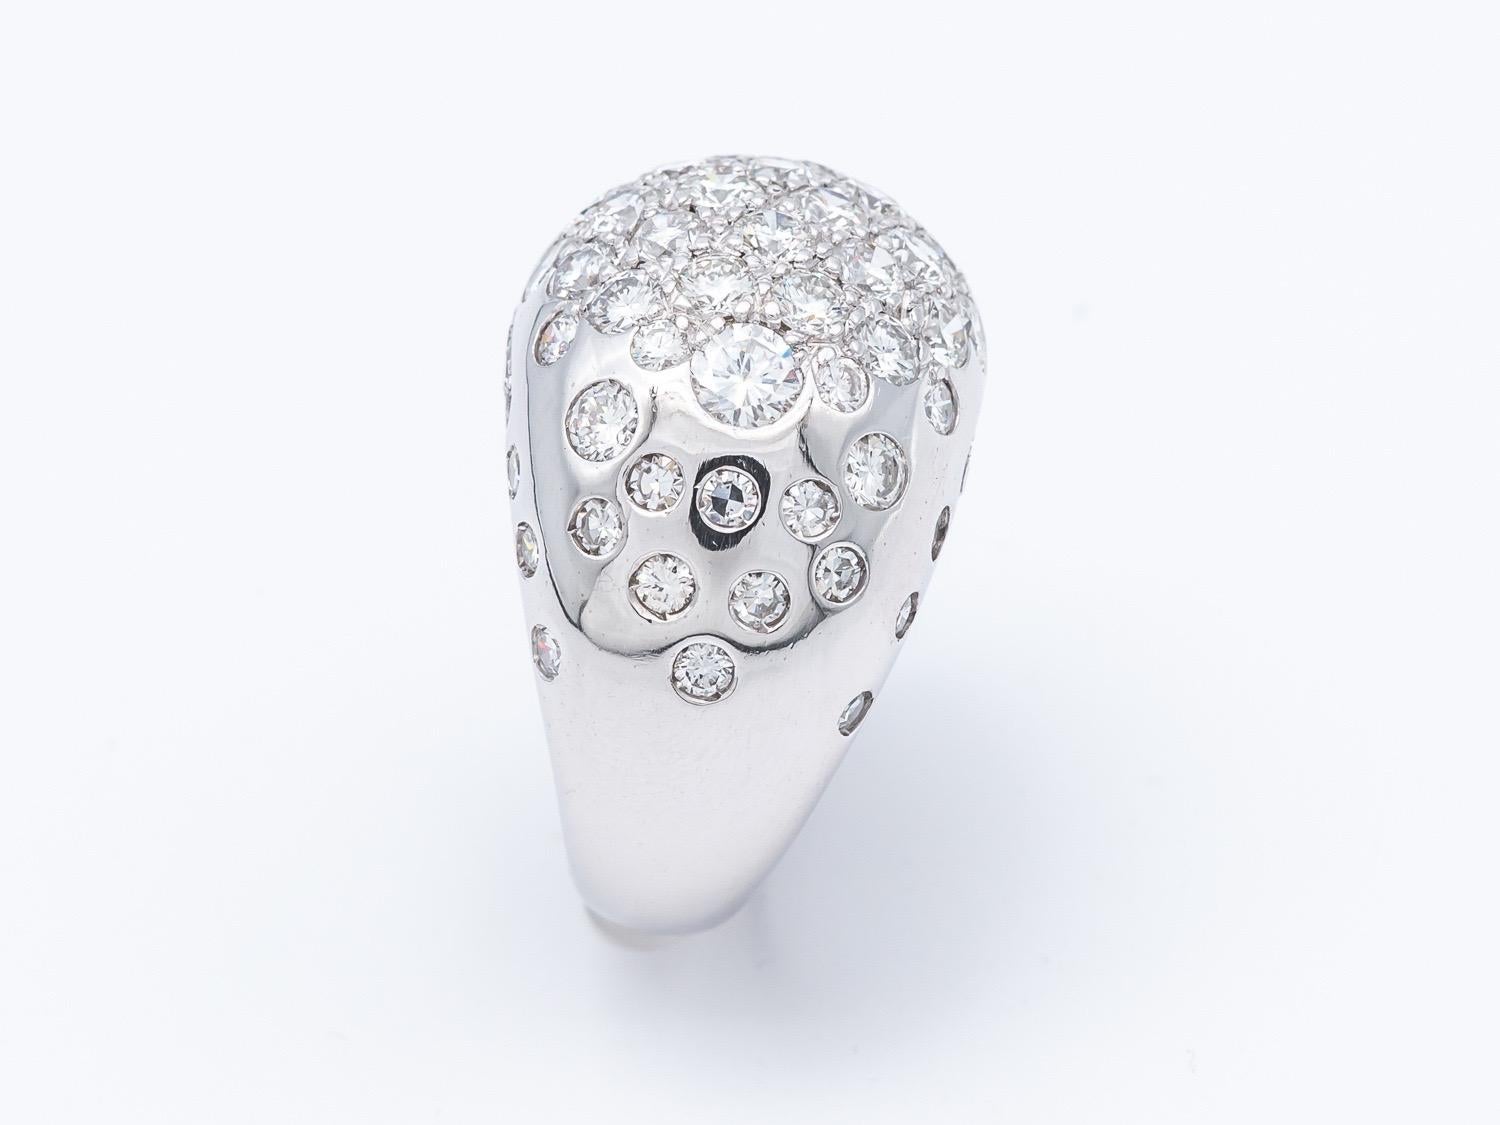 Behold the magnificent Dome Ring, a true marvel of elegance and luxury, meticulously crafted in 18K gold and adorned with a resplendent array of 54 brilliant cut diamonds. This opulent piece boasts a voluminous design, making it a striking statement